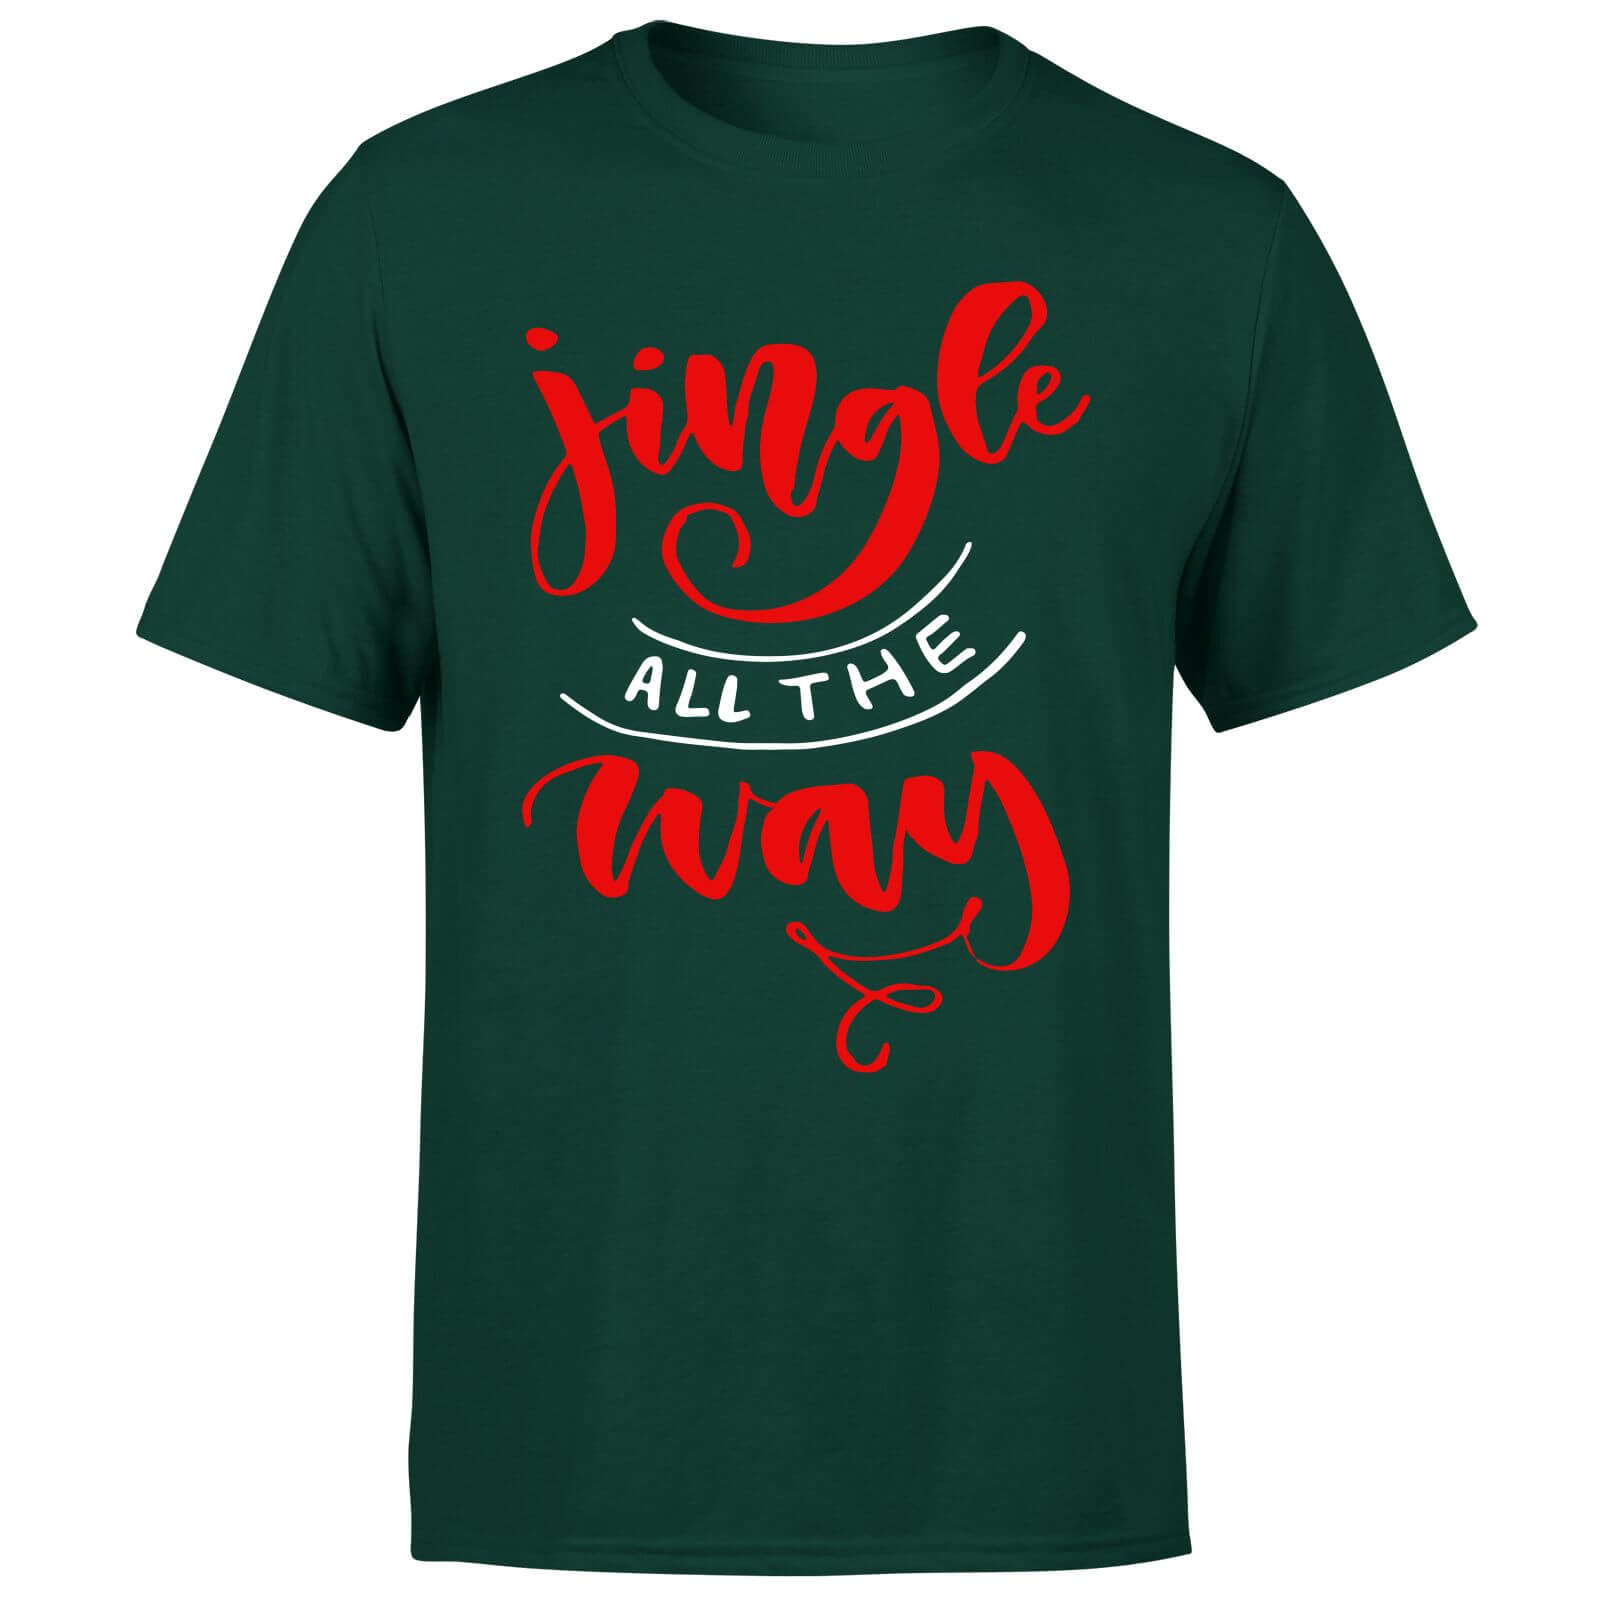 Jingle all the Way T-Shirt - Forest Green - S - Forest Green